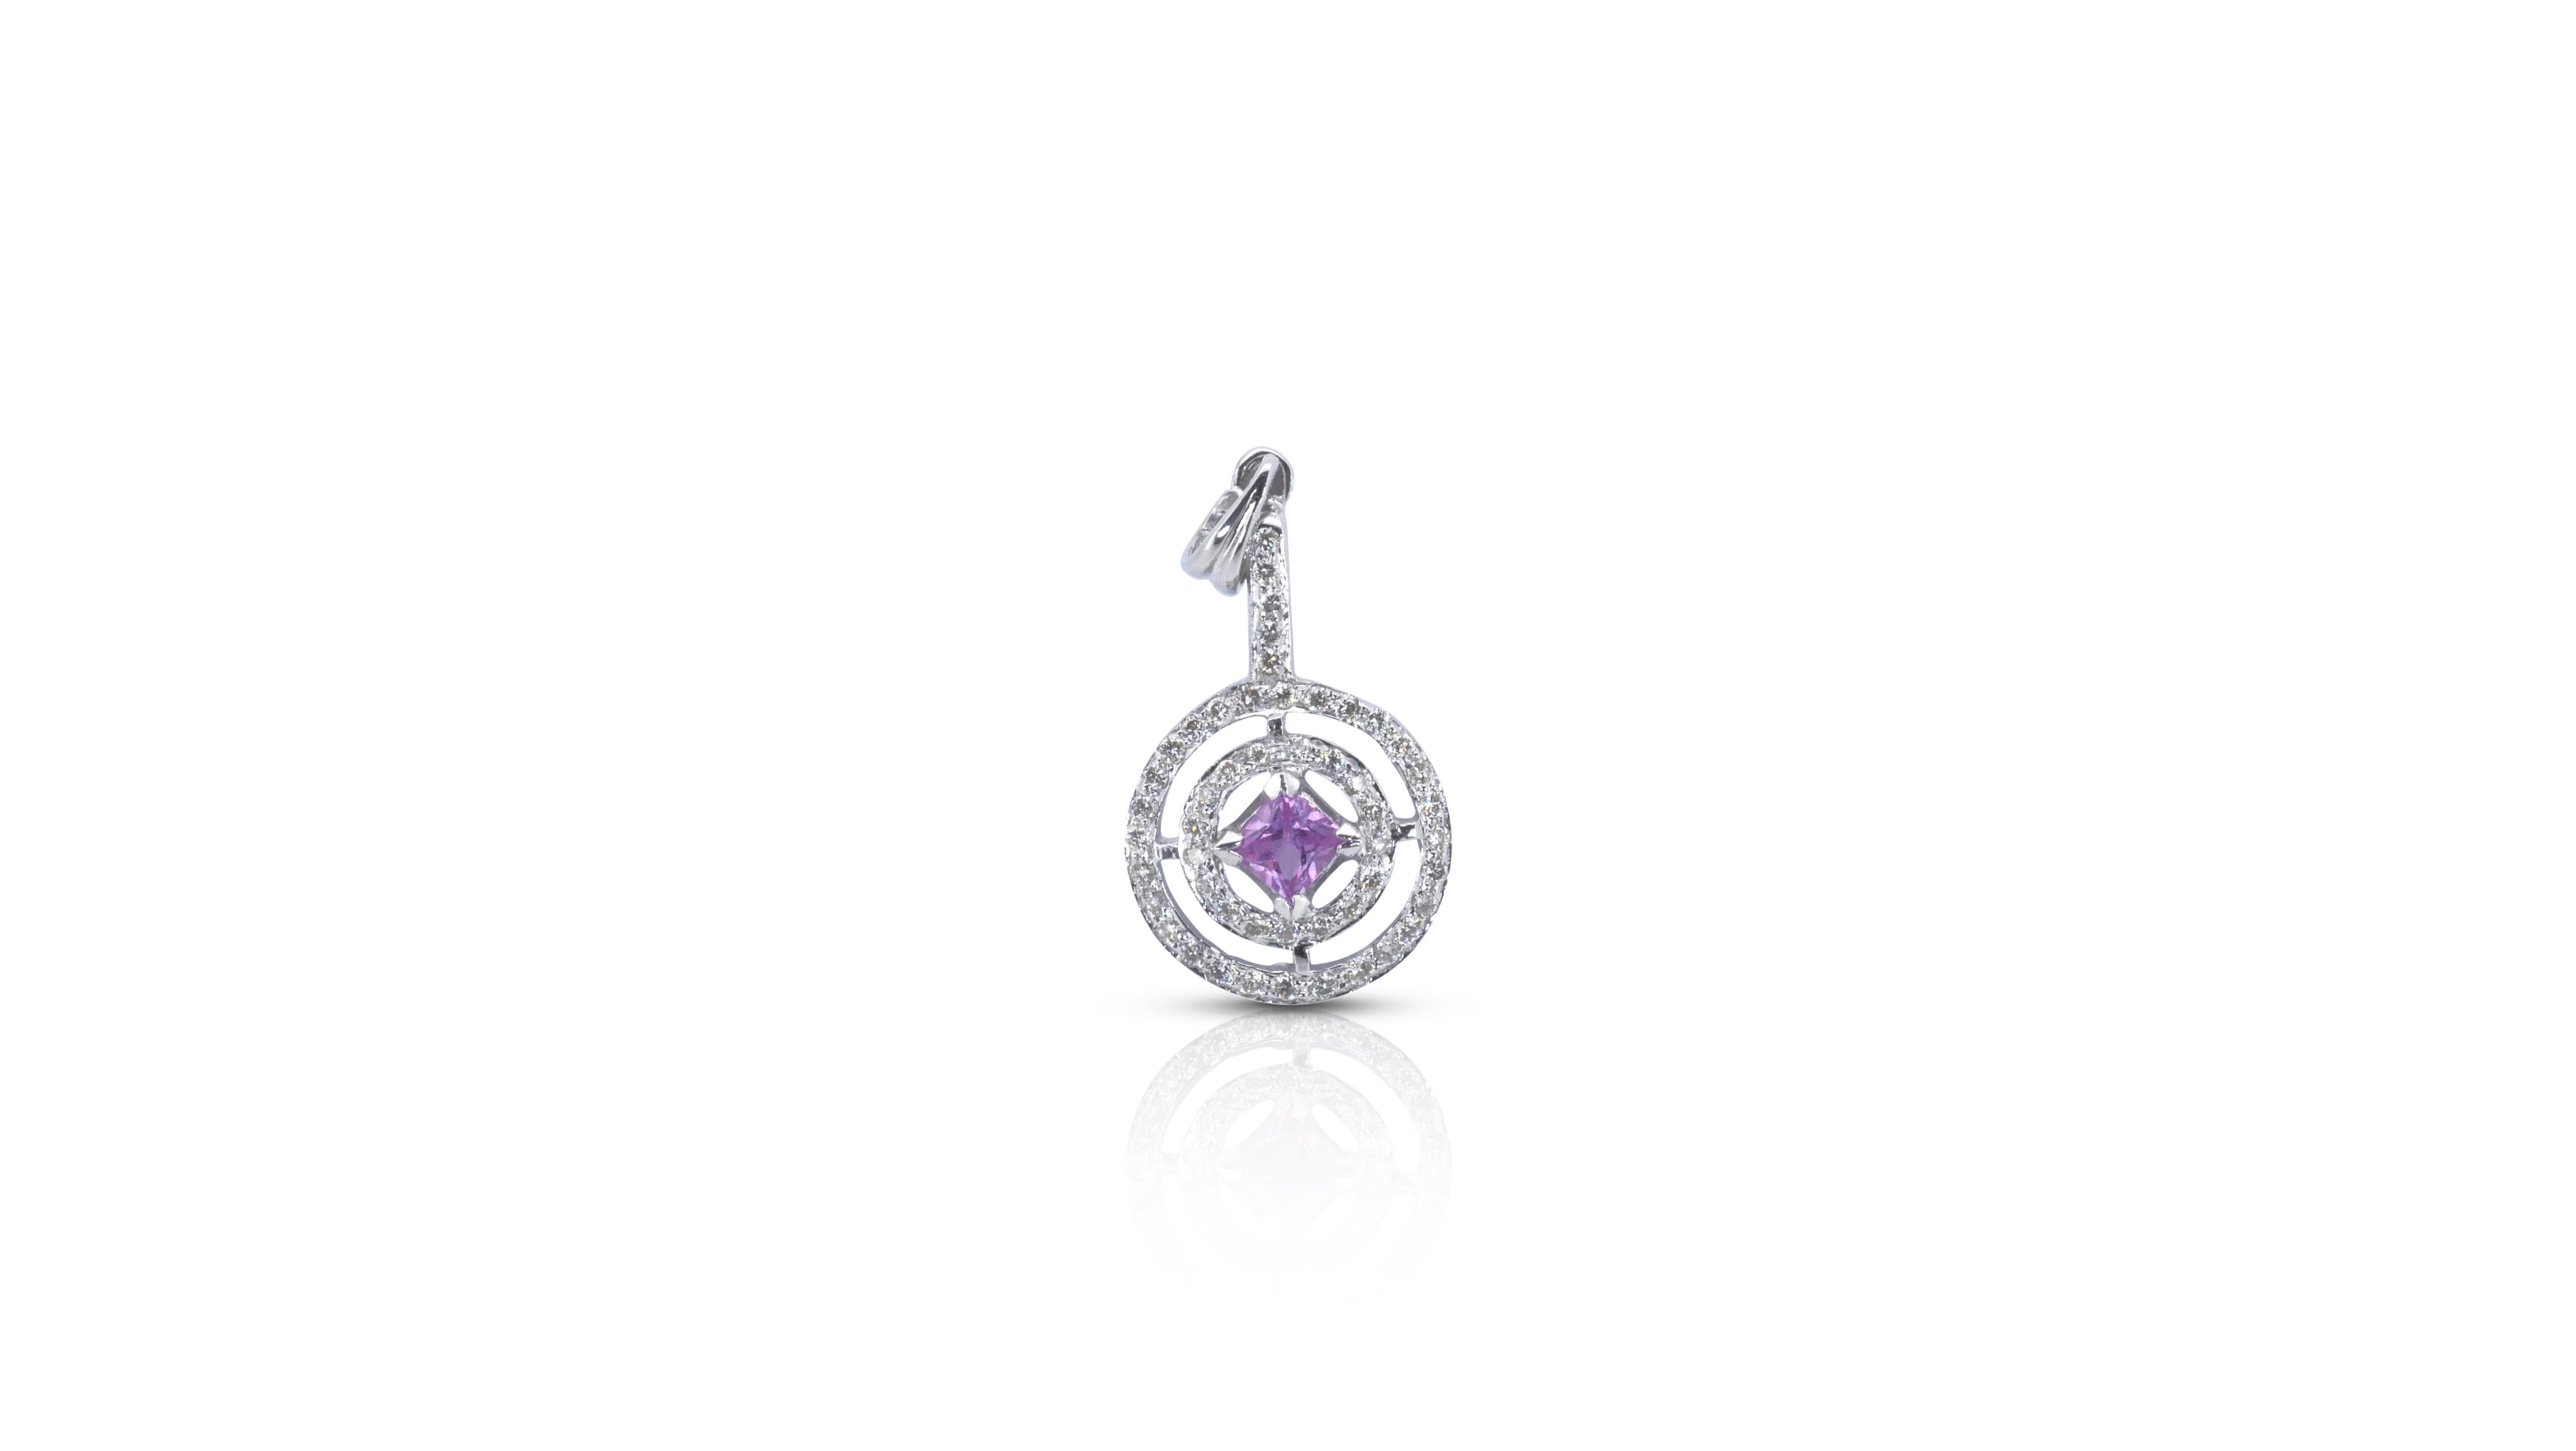 A sparkling halo pendant with a dazzling 0.1 carat natural sapphire. It has 0.16 carat of side diamonds which add more to its elegance. The jewelry is made of 18k white gold with high-quality polish. It comes with a fancy jewelry box.

1 sapphire